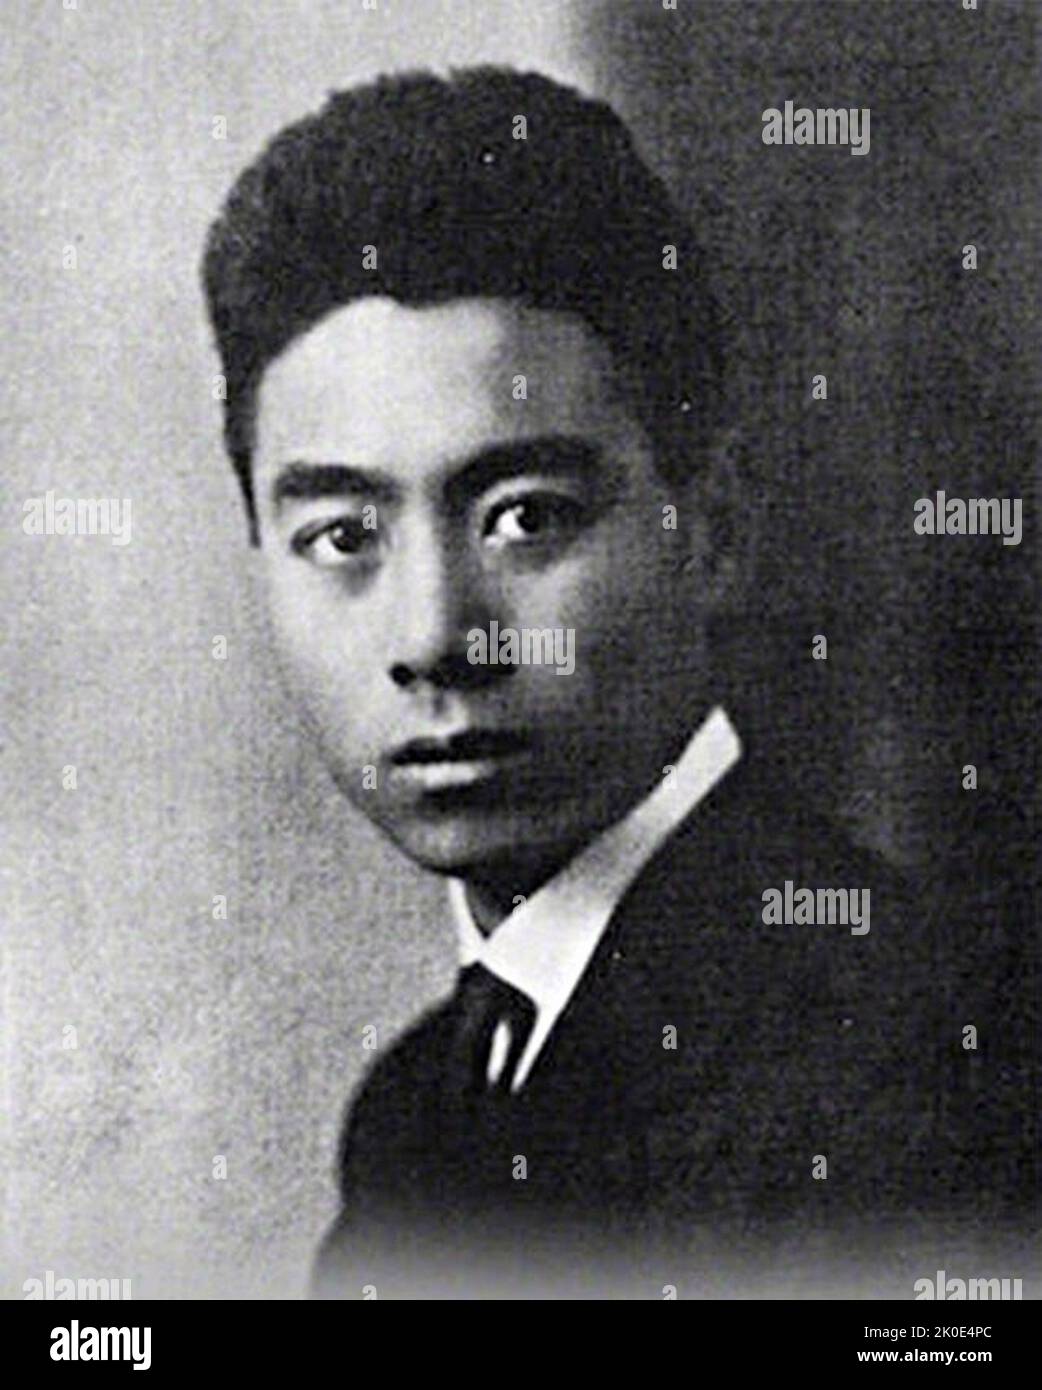 A portrait of the young Zhou Enlai (1898 - 1976), first Premier of the People's Republic of China. From October 1949 until his death in January 1976, Zhou was China's head of government. Zhou served under Chairman Mao Zedong and helped the Communist Party rise to power, later helping consolidate its control, form its foreign policy, and develop the Chinese economy. Stock Photo